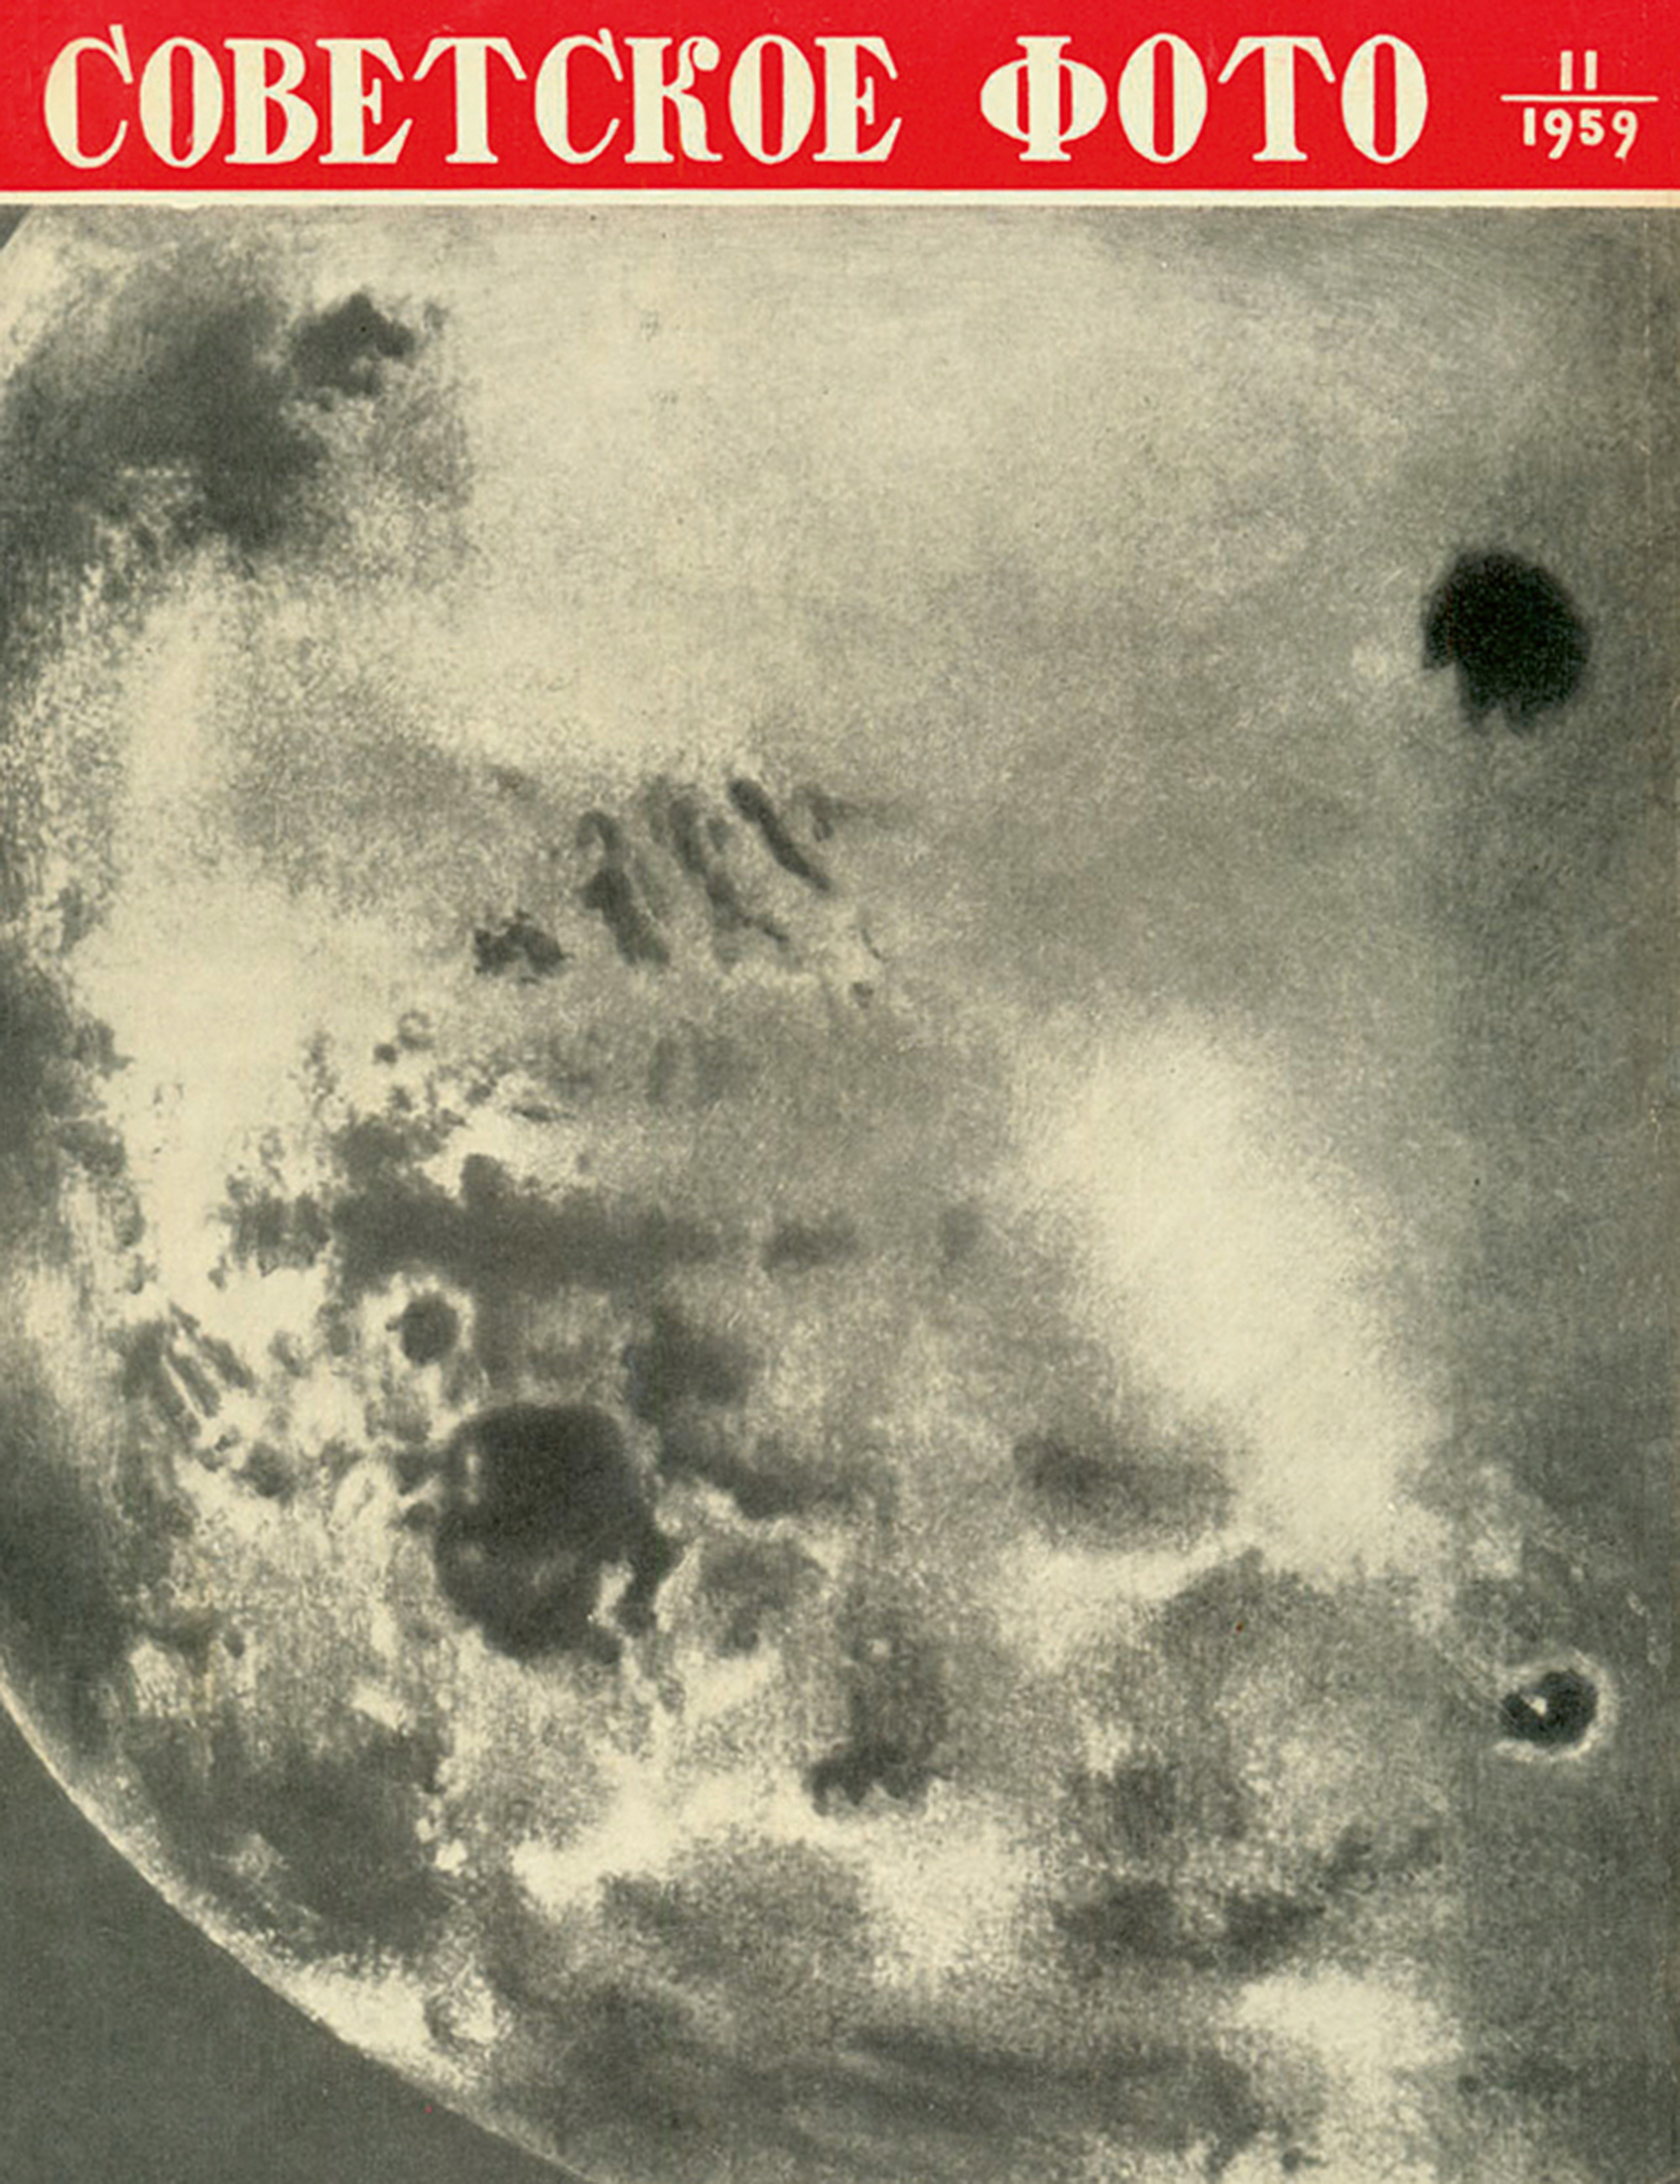 A Luna 3 image of the dark side of the moon gracing the cover of the November 1959 issue of Sovetskoe Foto.